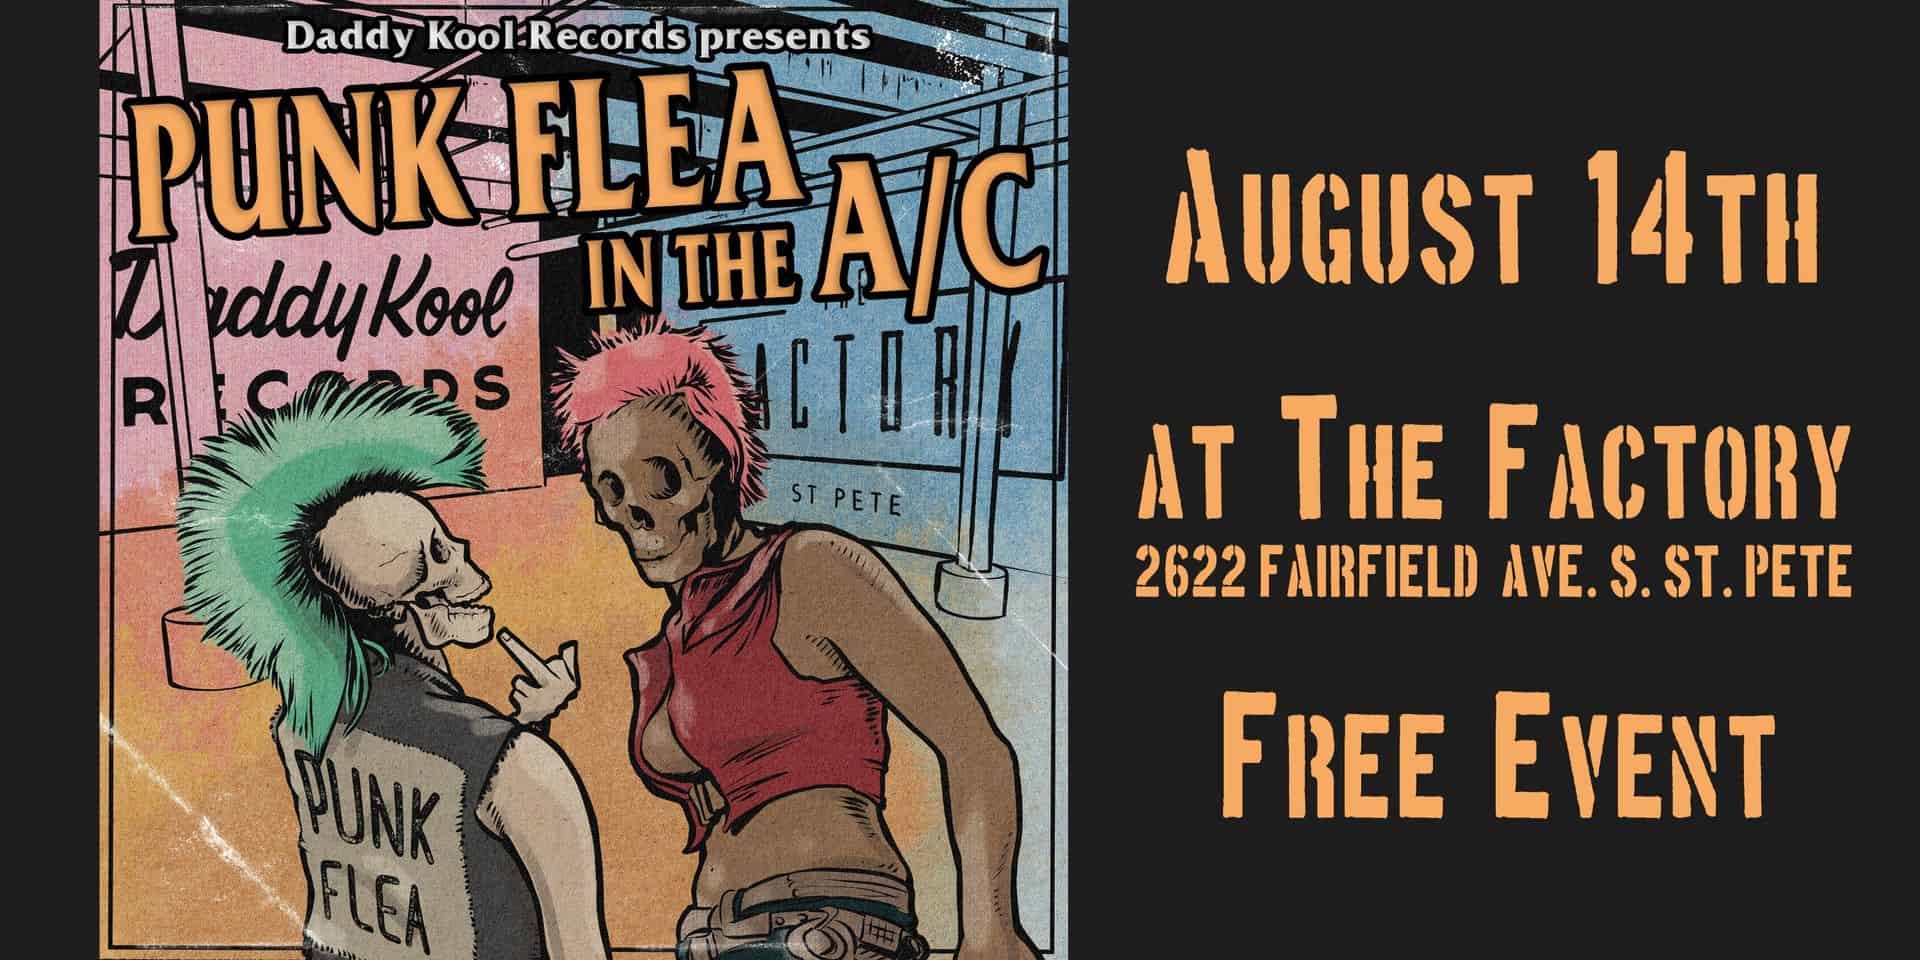 Daddy Kool presents PUNK FLEA in the A/C August 14th at the Factory